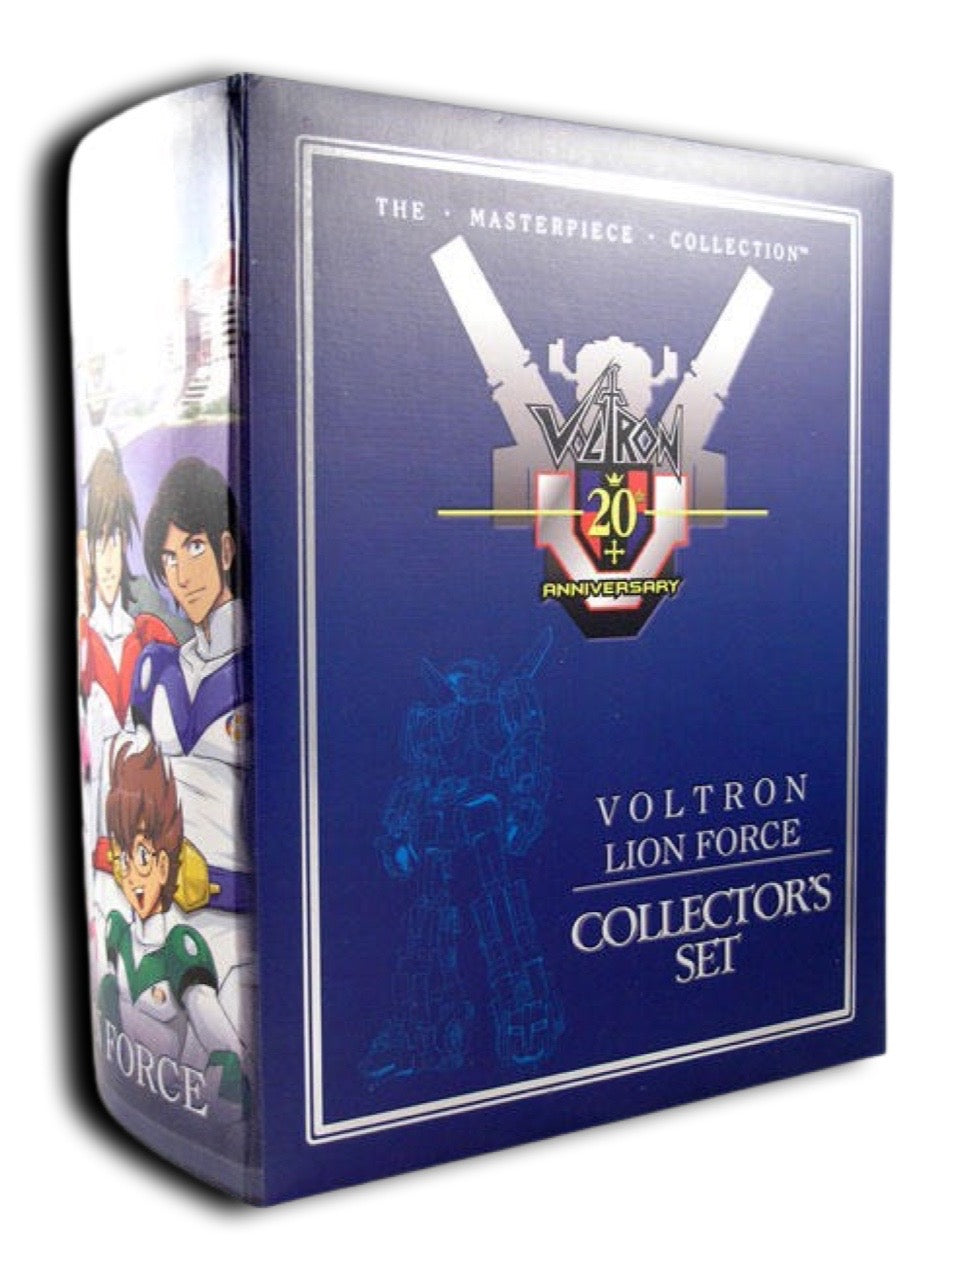 Voltron Masterpiece | 20th Anniversary Lion Force Collector Set | Toynami 2005-10